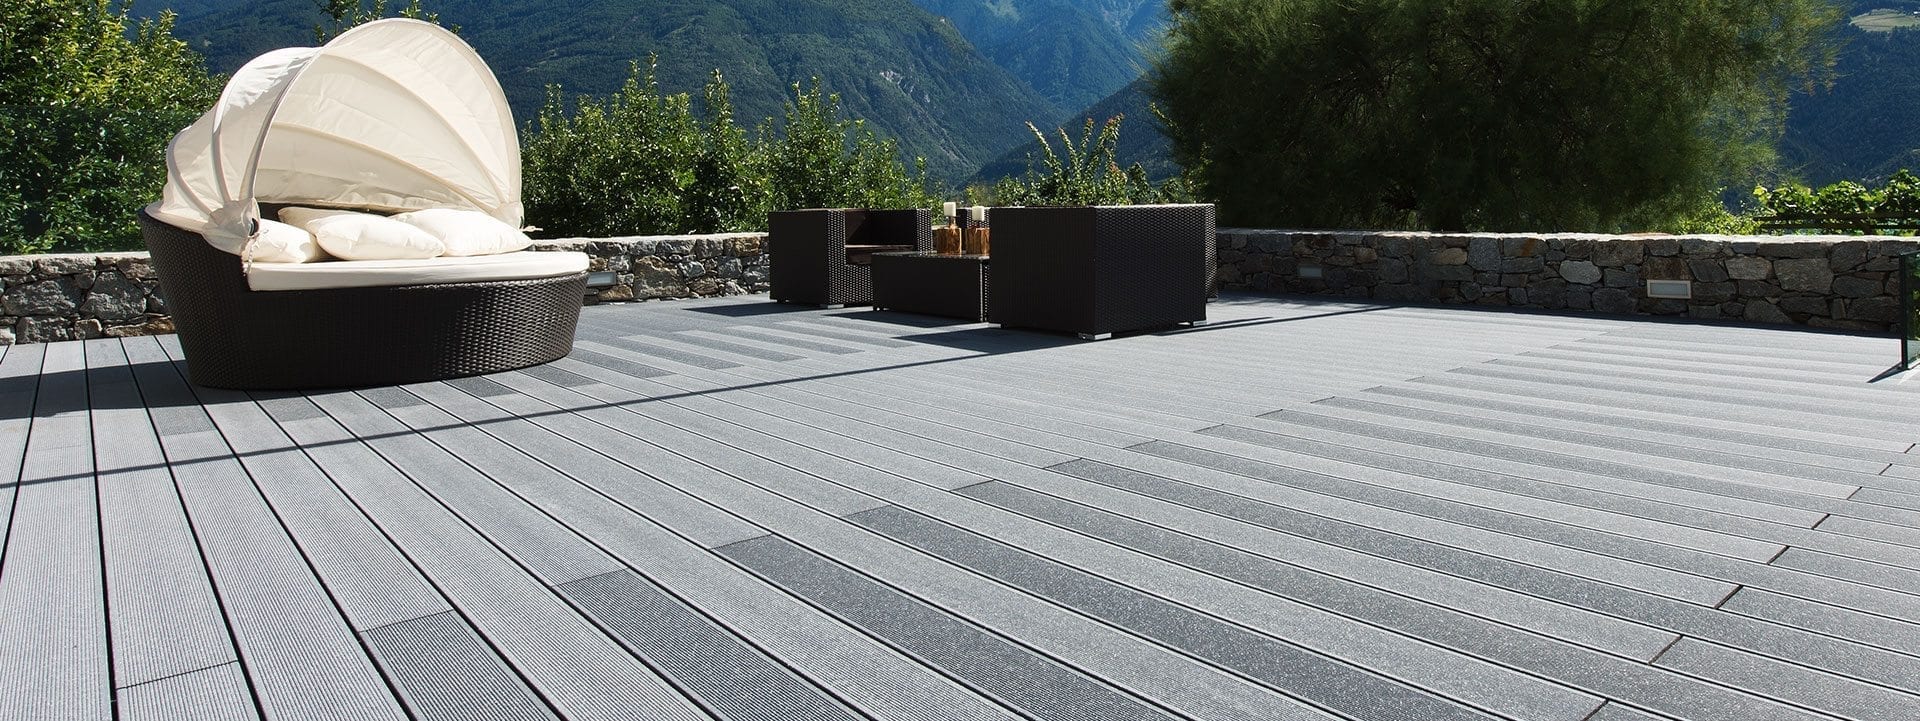 Composite Decking Installers Near Me